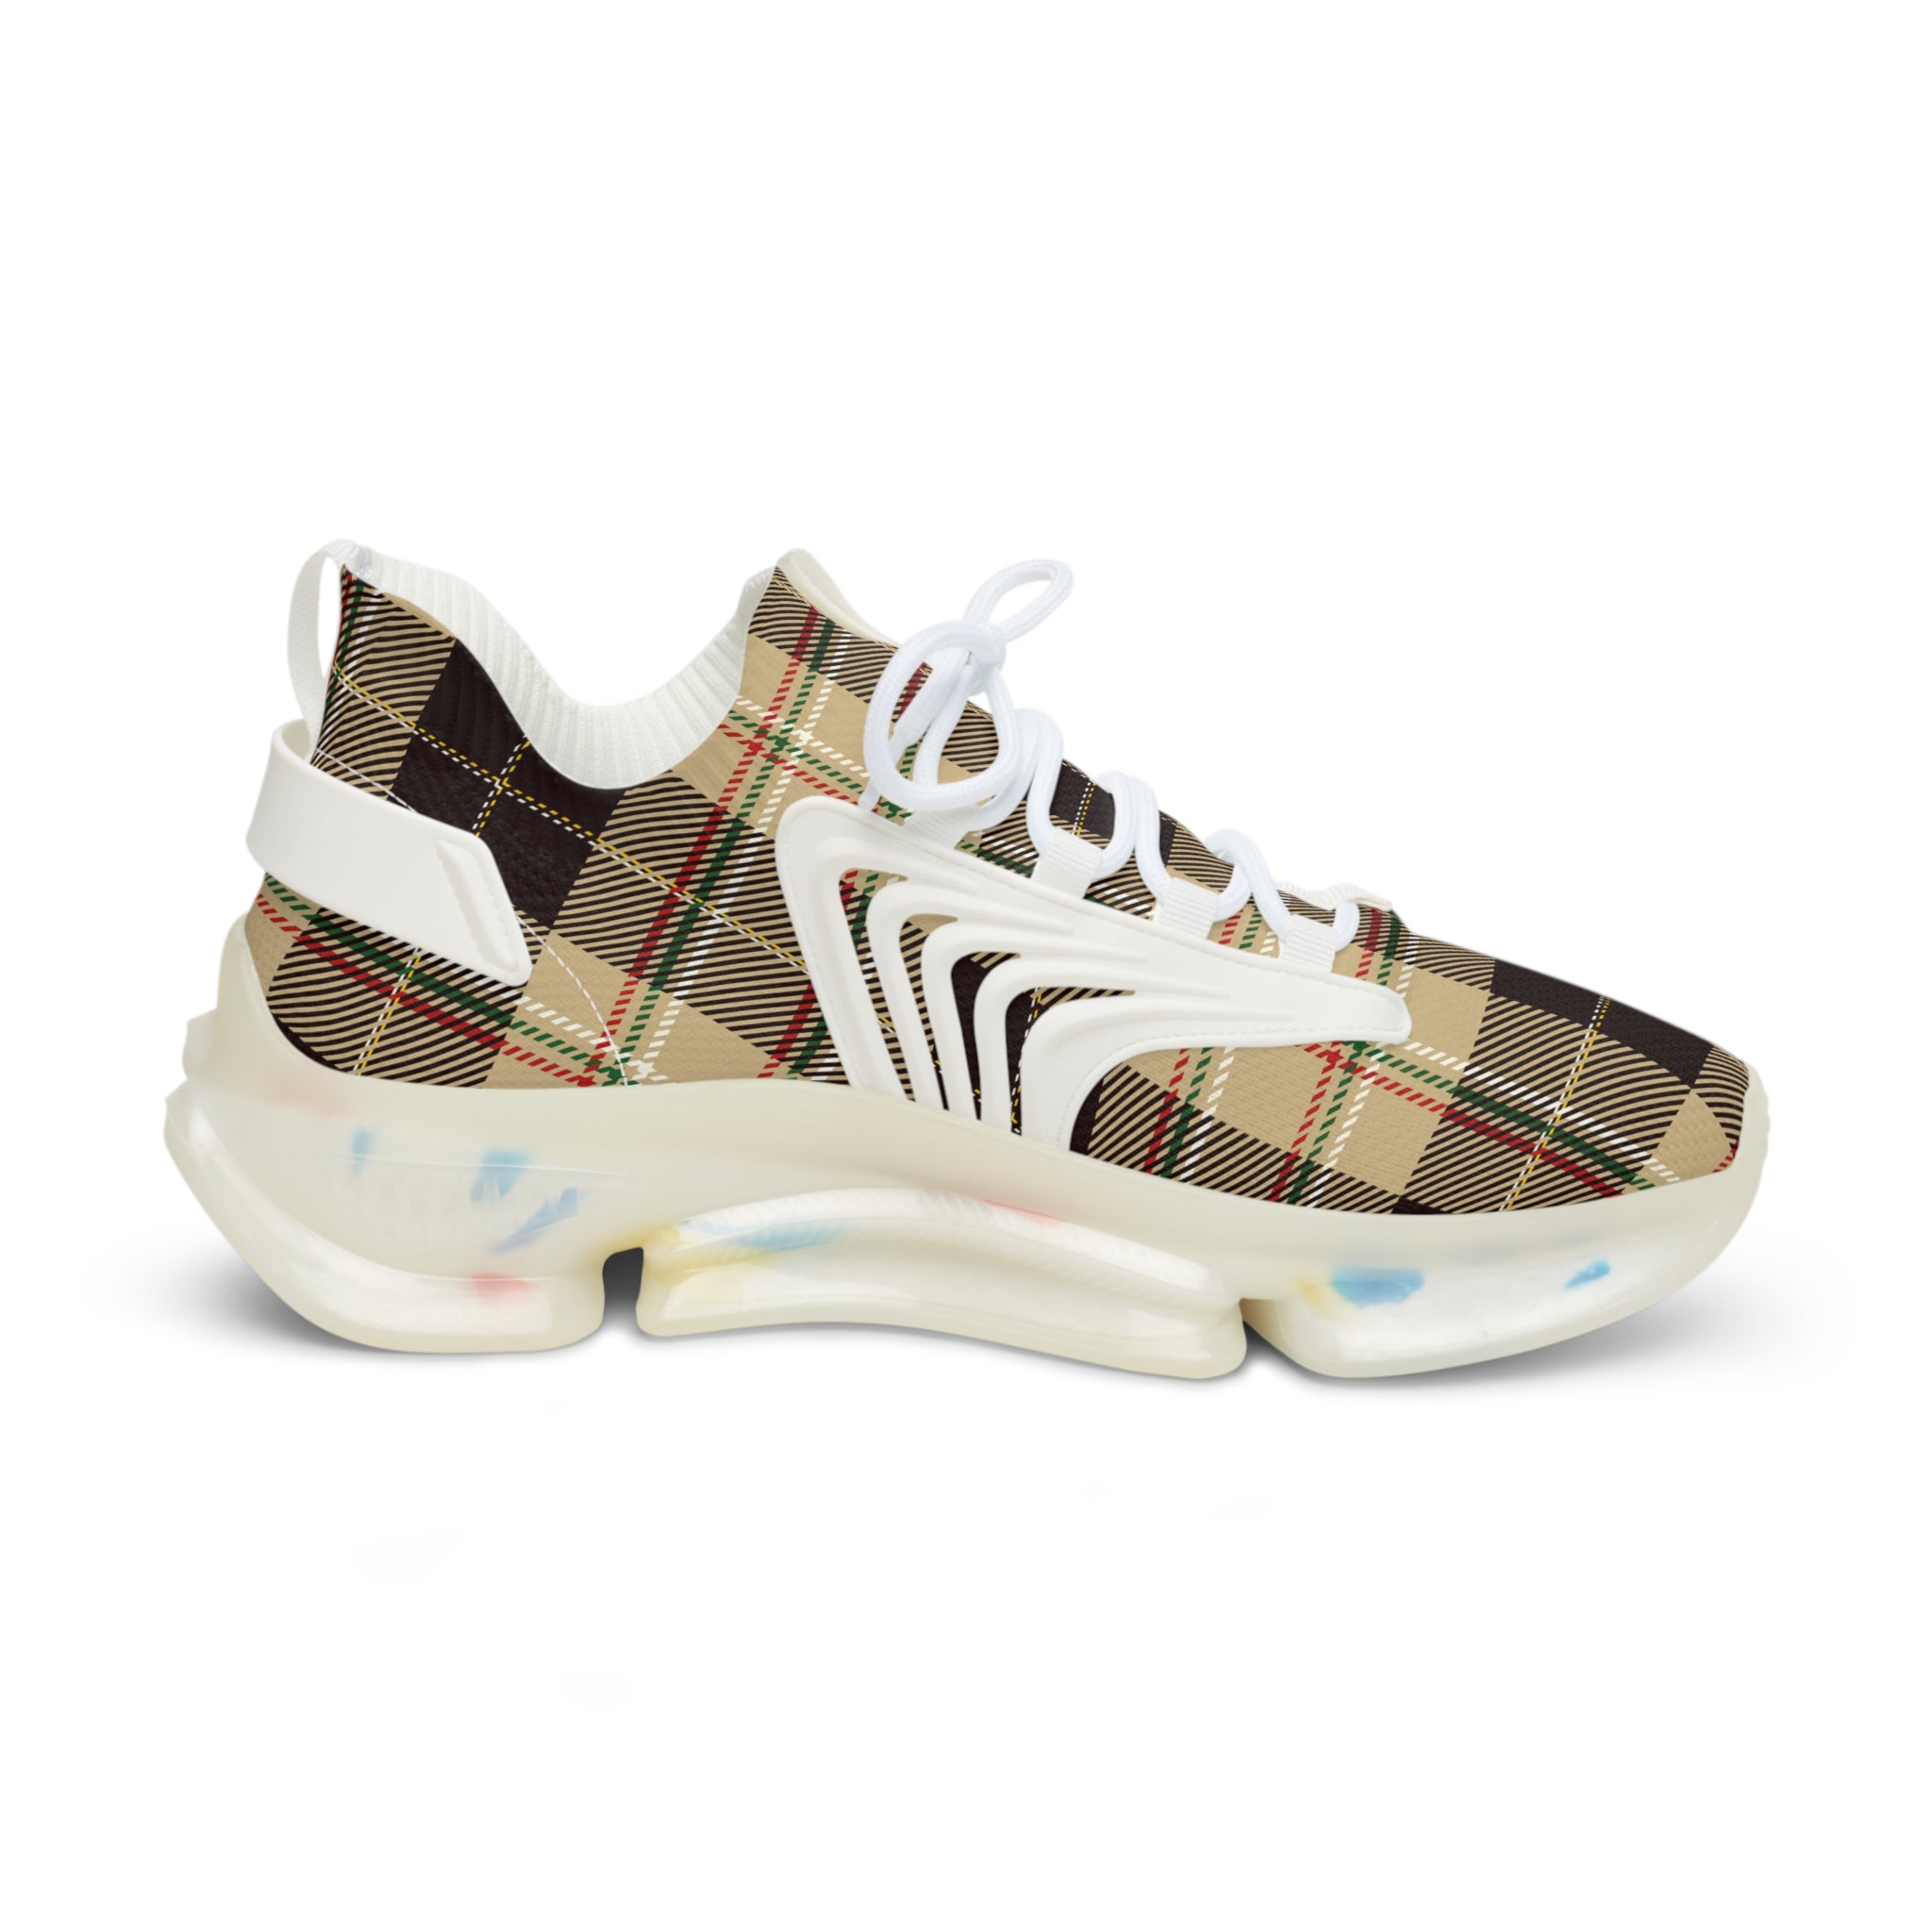 Groove Collection Dark Brown Plaid Men's Mesh Sneakers with Black or White Sole